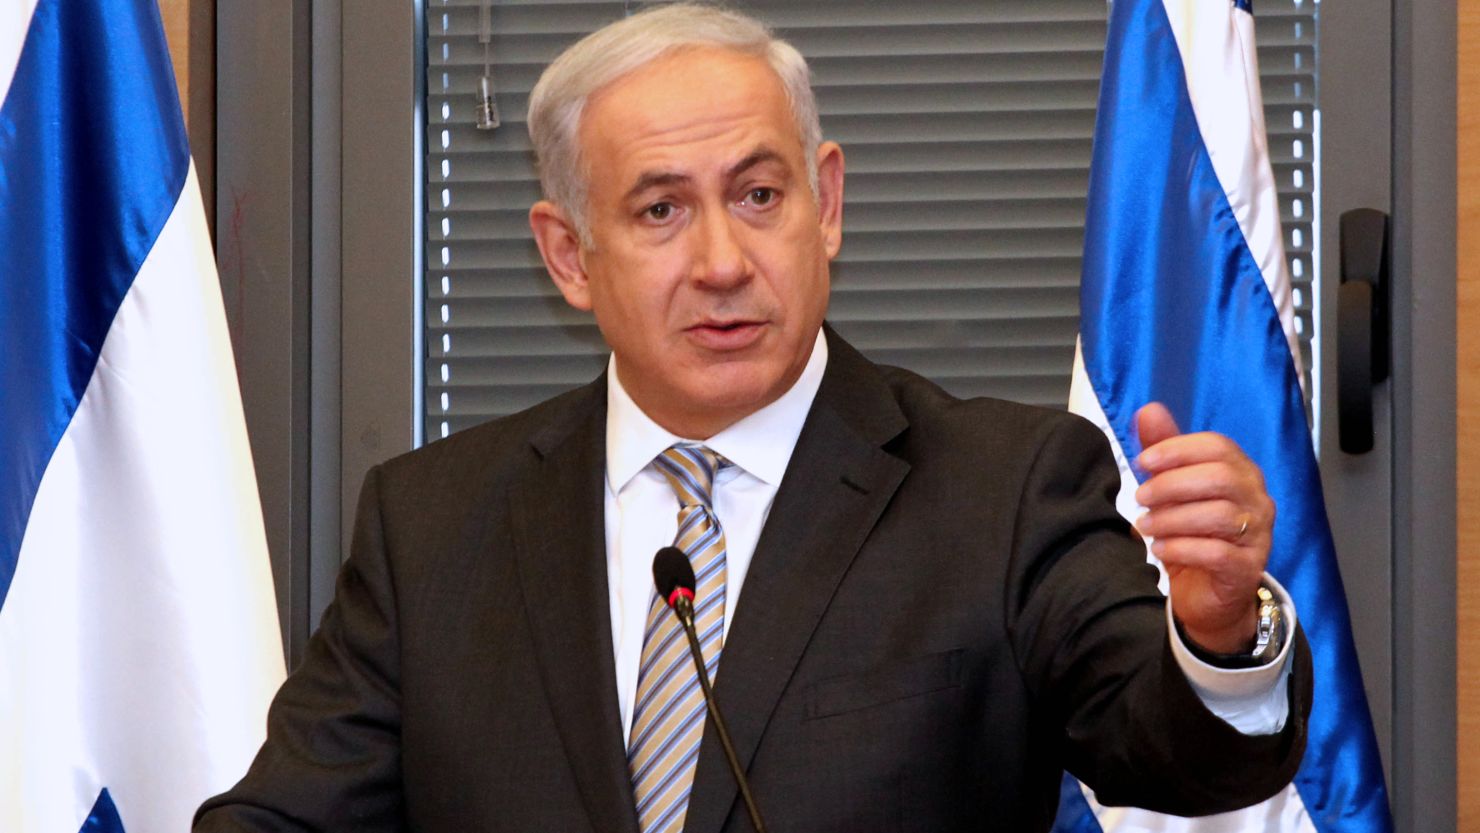 Israeli Prime Minister Benjamin Netanyahu, set to speak Friday at the United Nations, faces a much changed region.